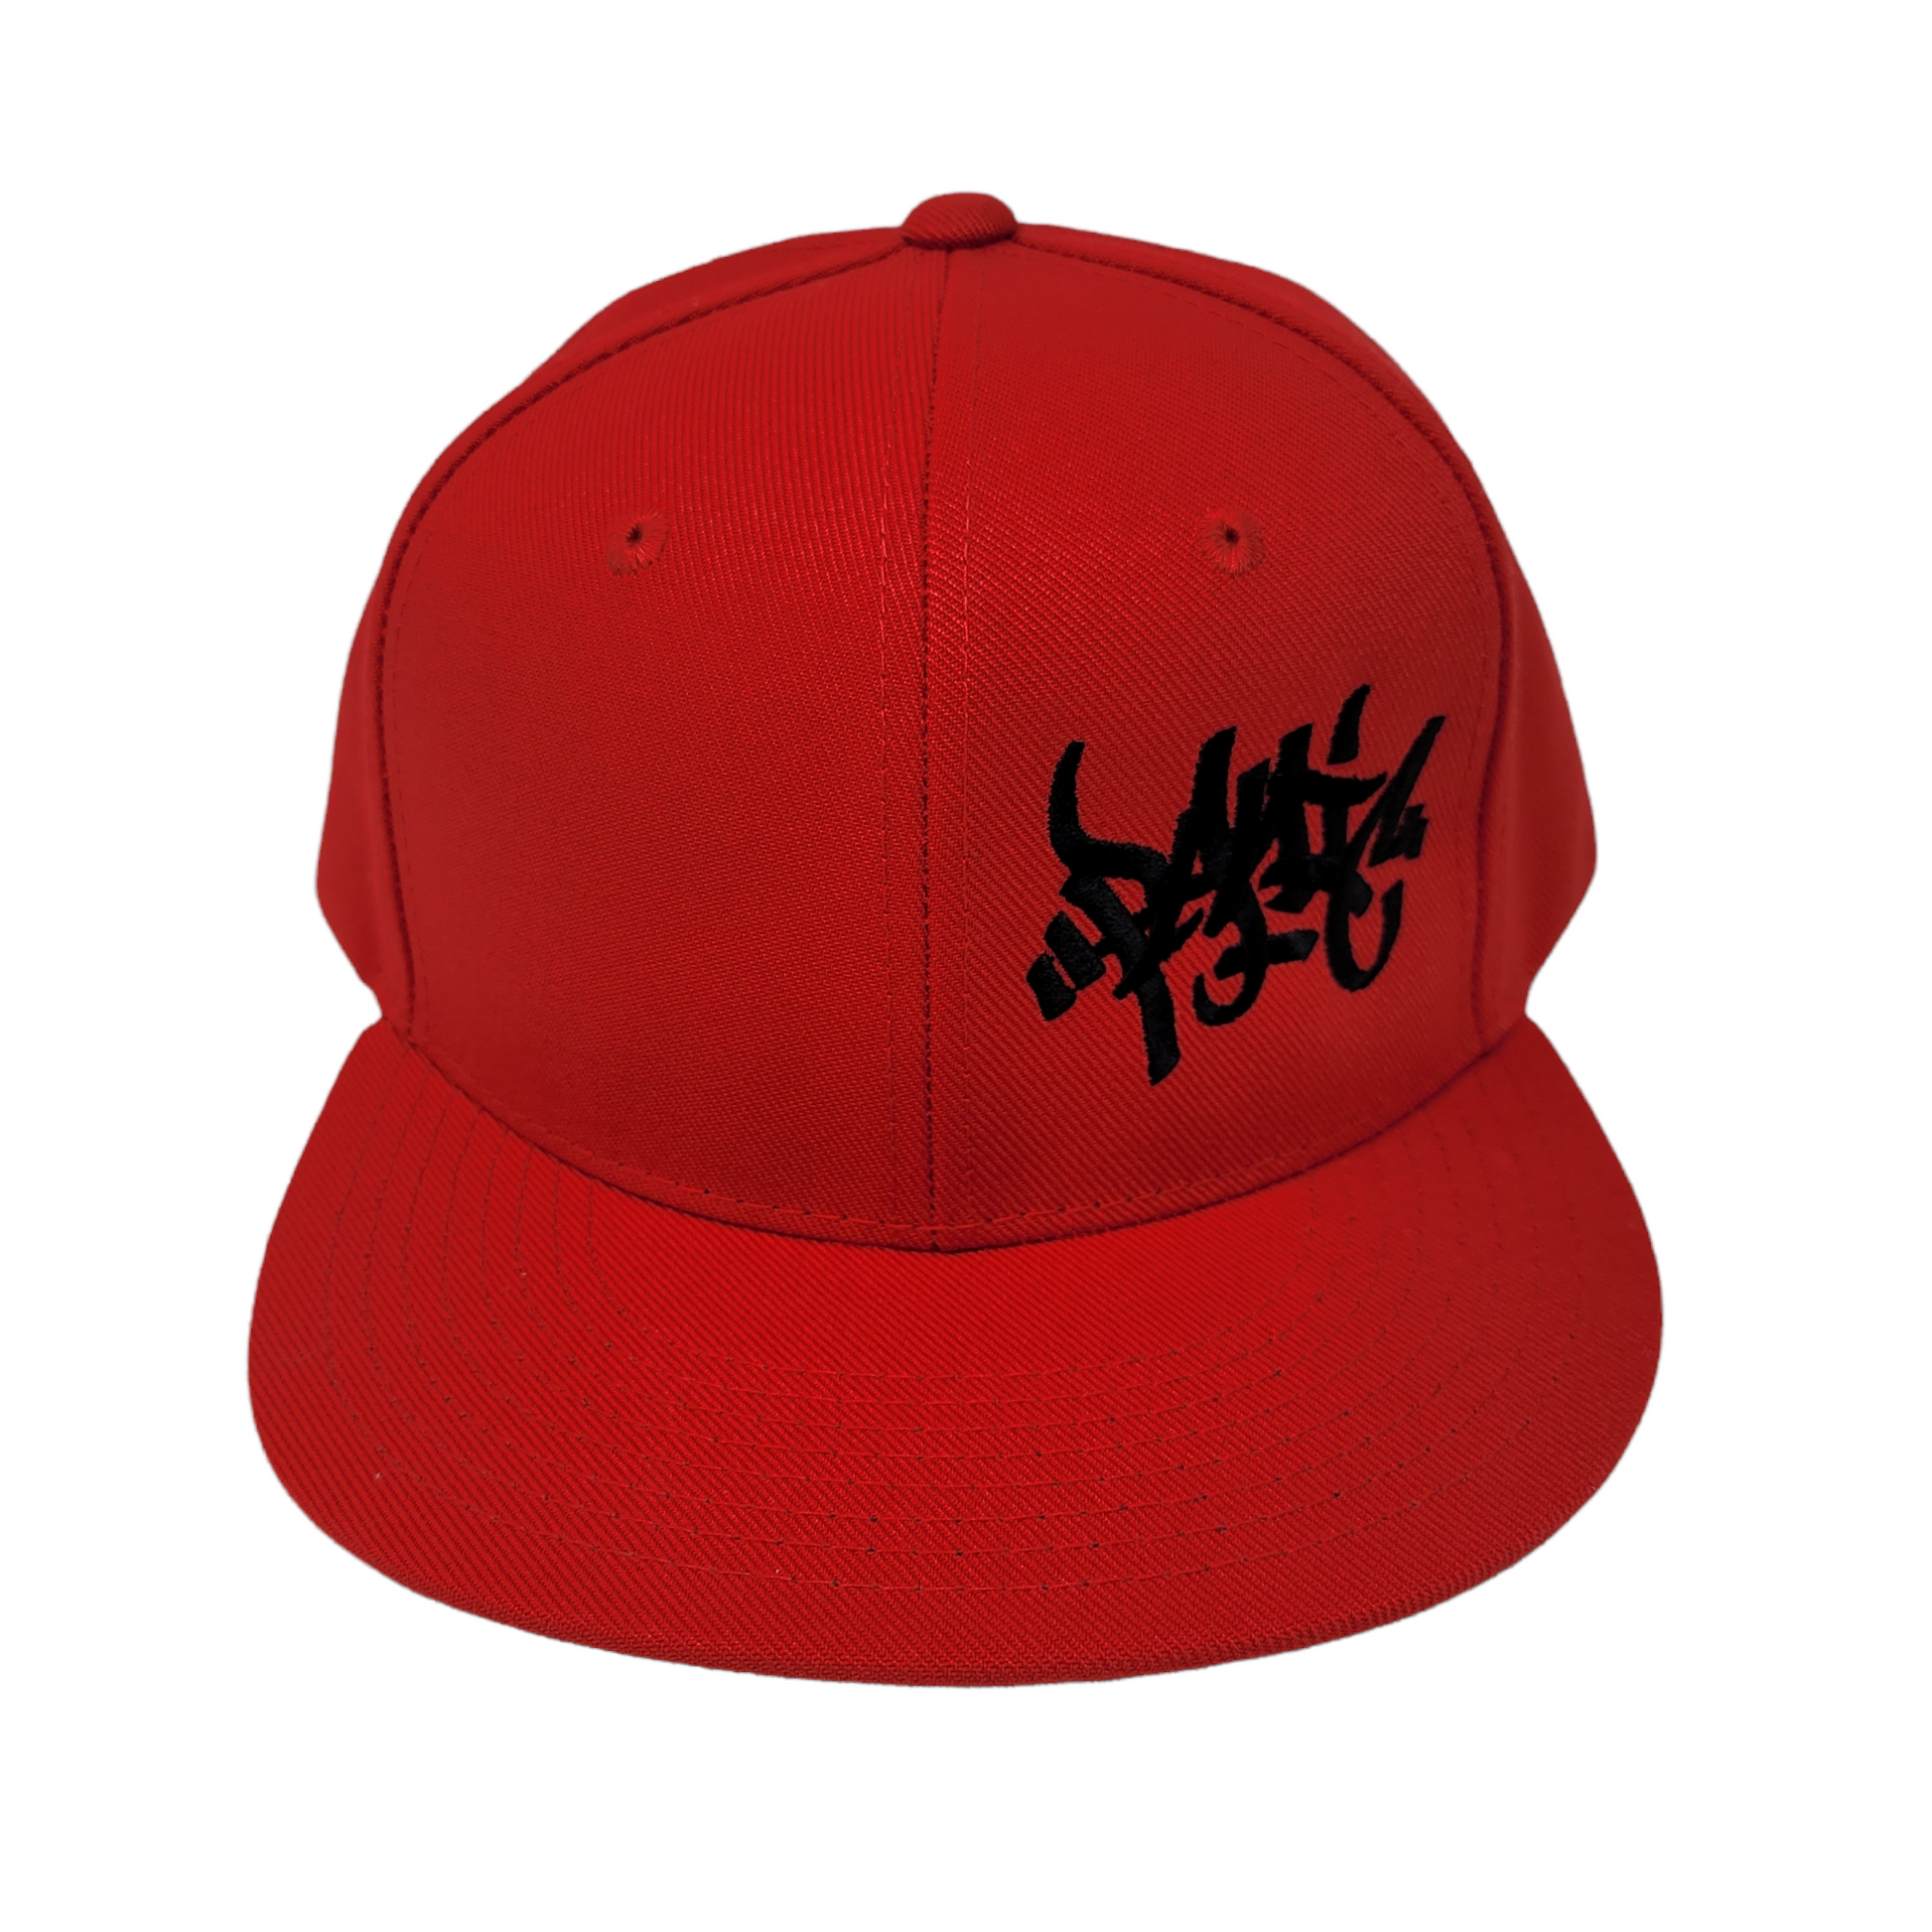 THE RED TAG LOGO SNAPBACK HAT - Panic 39